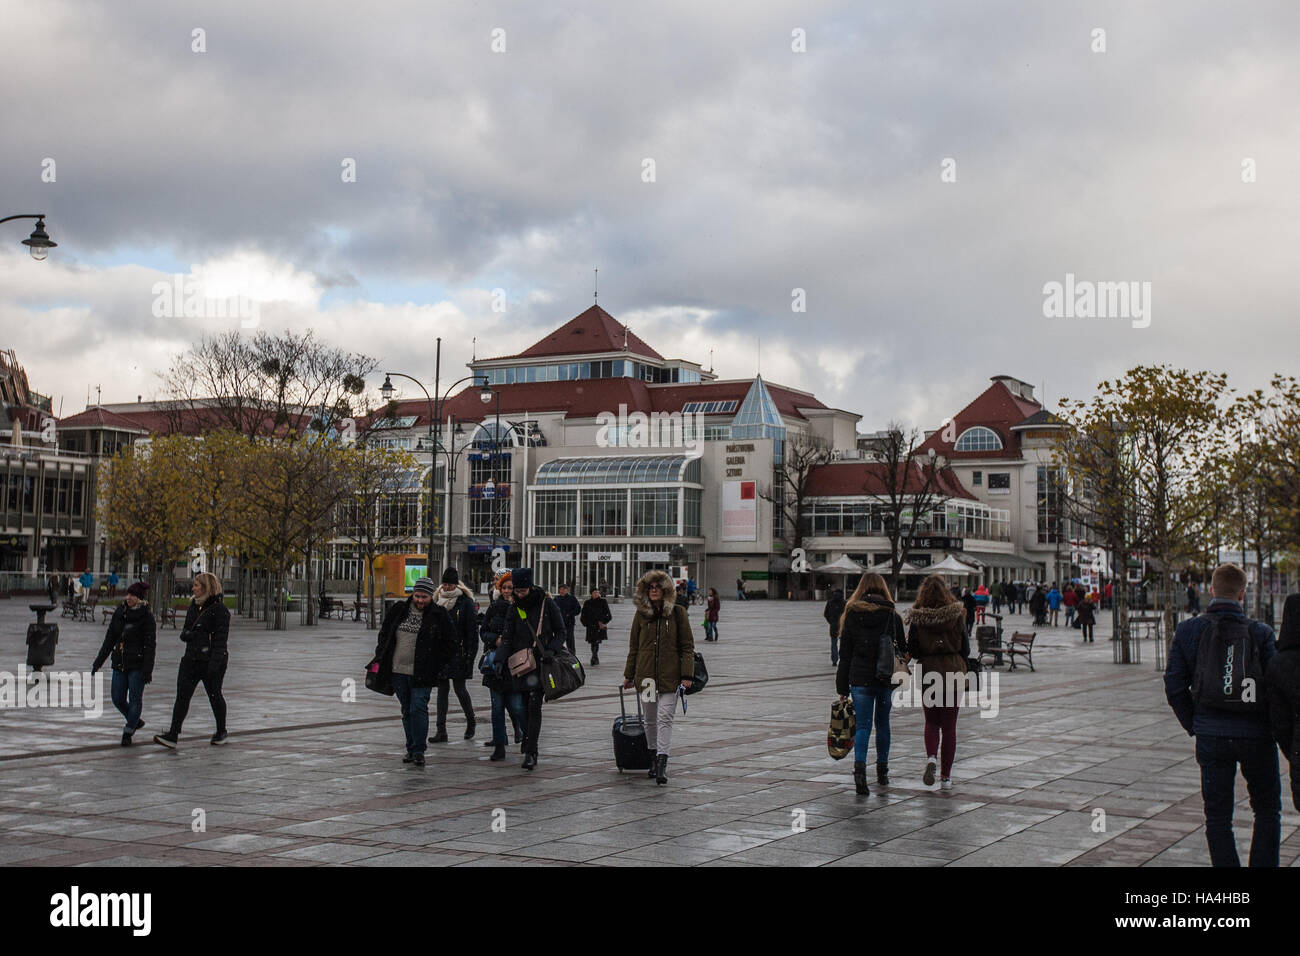 Sopot, Poland 27 November 2016 Cold day in Sopot. People walking in winter clothes at the Plac Zdrojowy are seen. Meteorologists predict high snow fall in nex few hours. Credit:  Michal Fludra/Alamy Live News Stock Photo